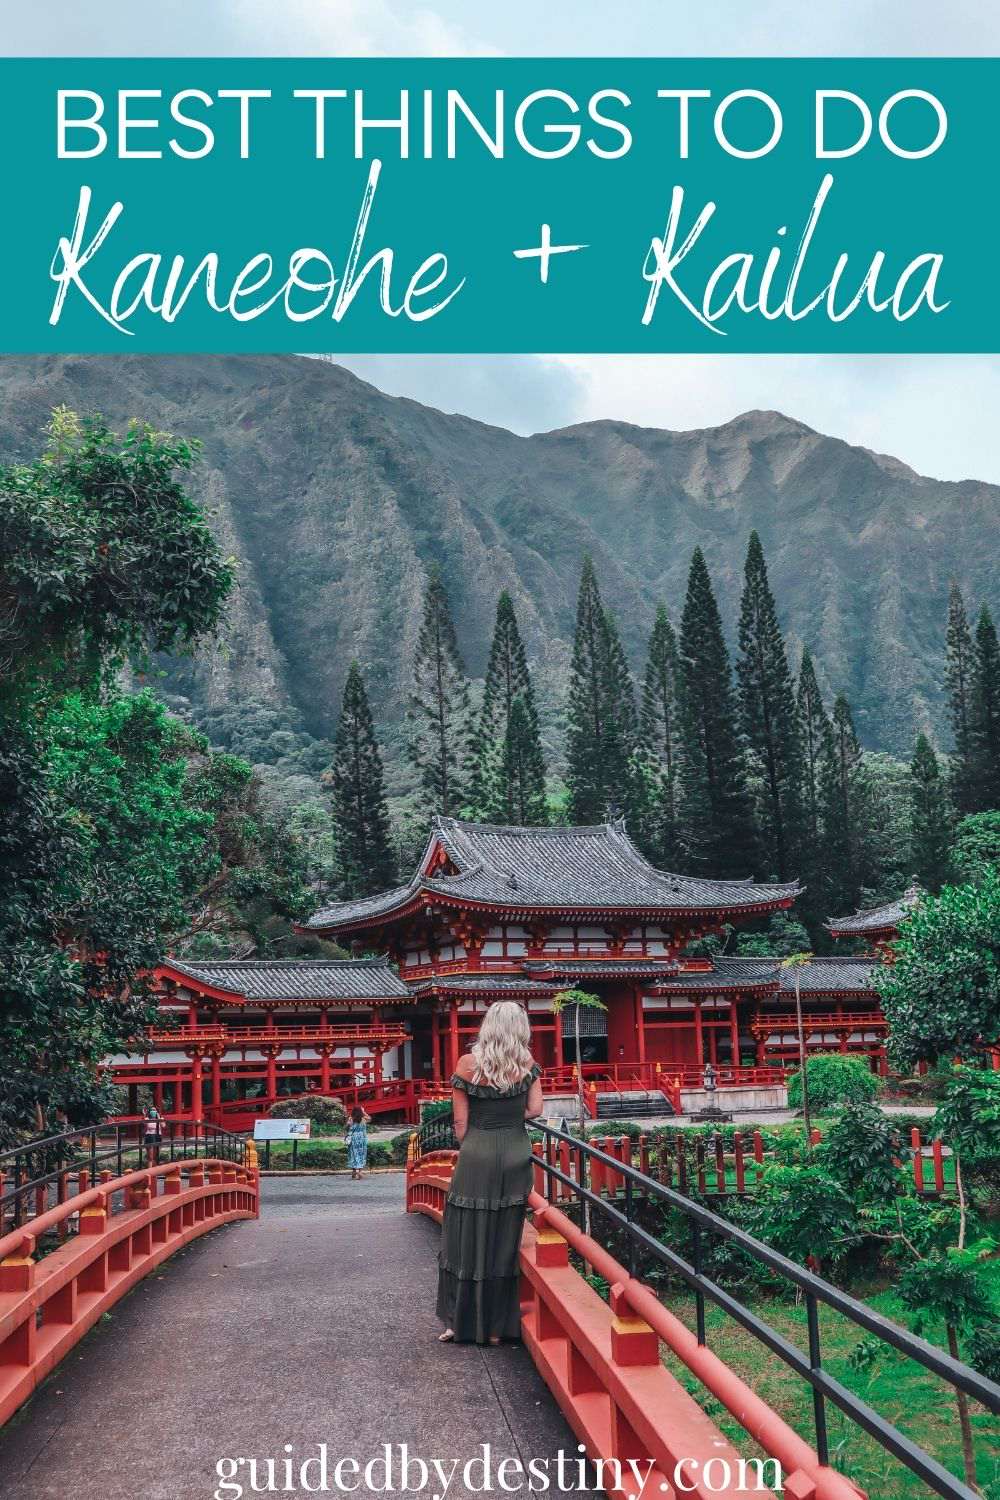 best things to do in Kaneohe and Kailua